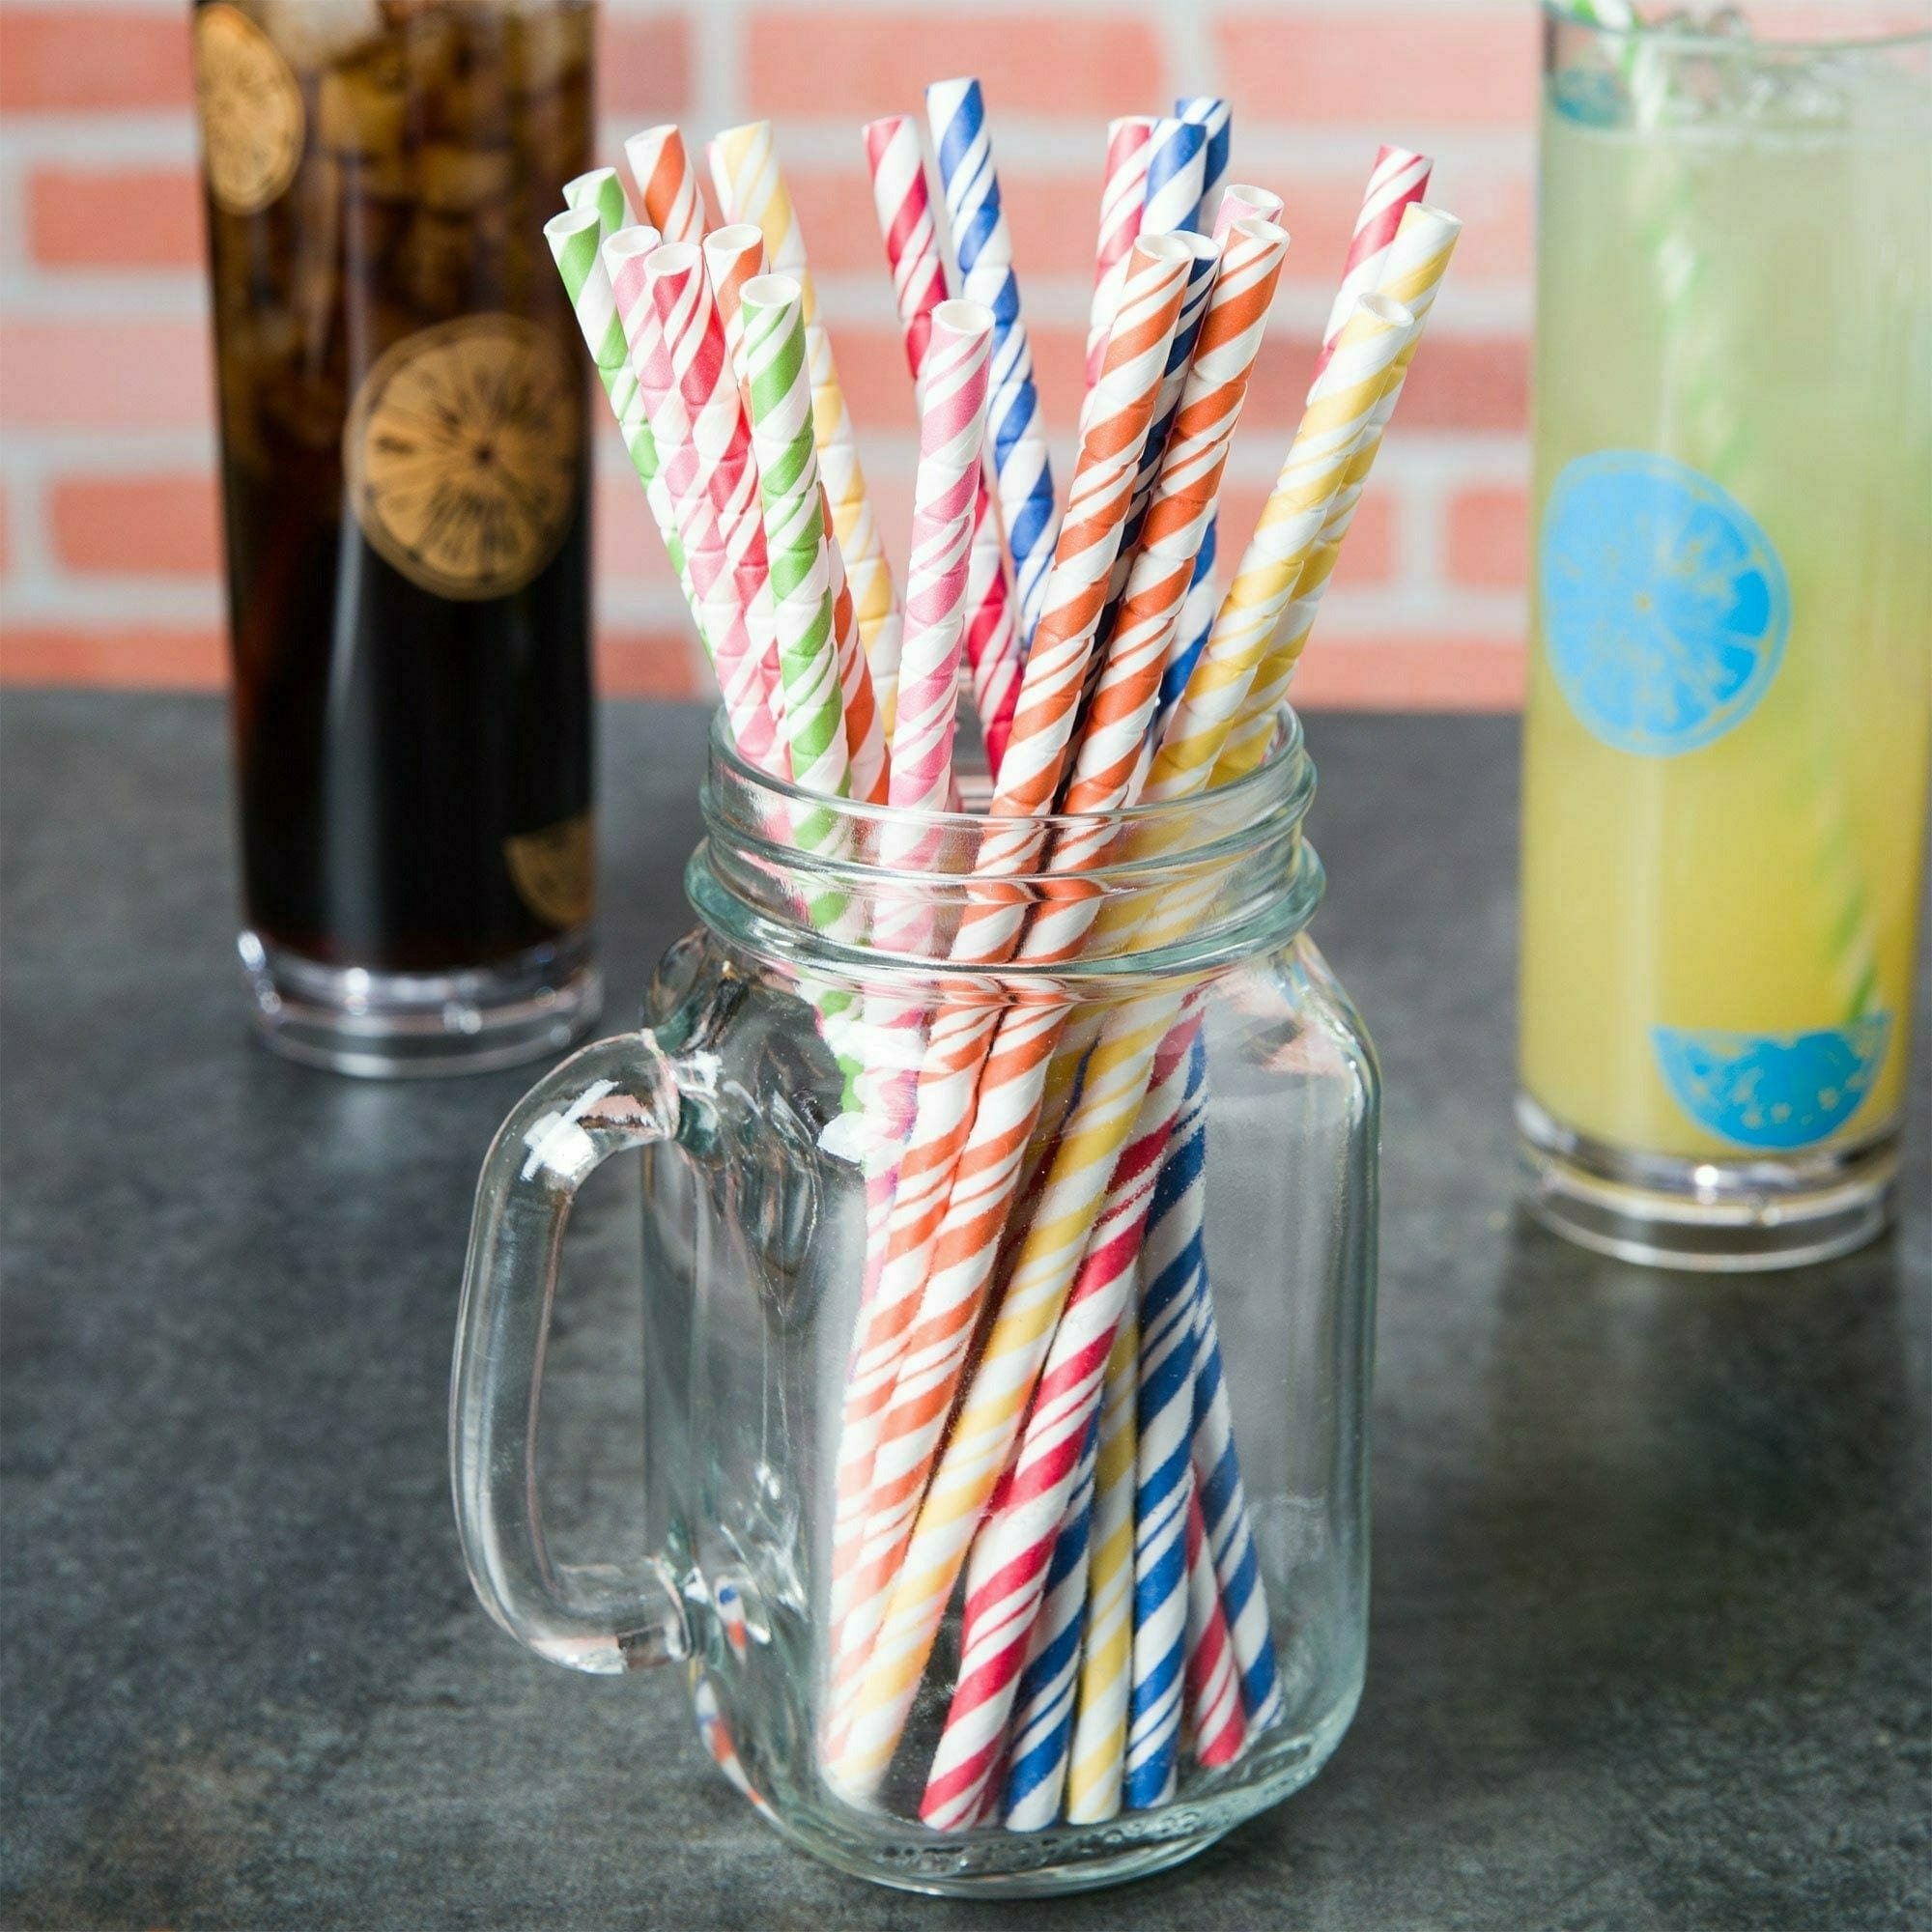 Creative Converting BASIC Assorted Colors with White Striped Straws